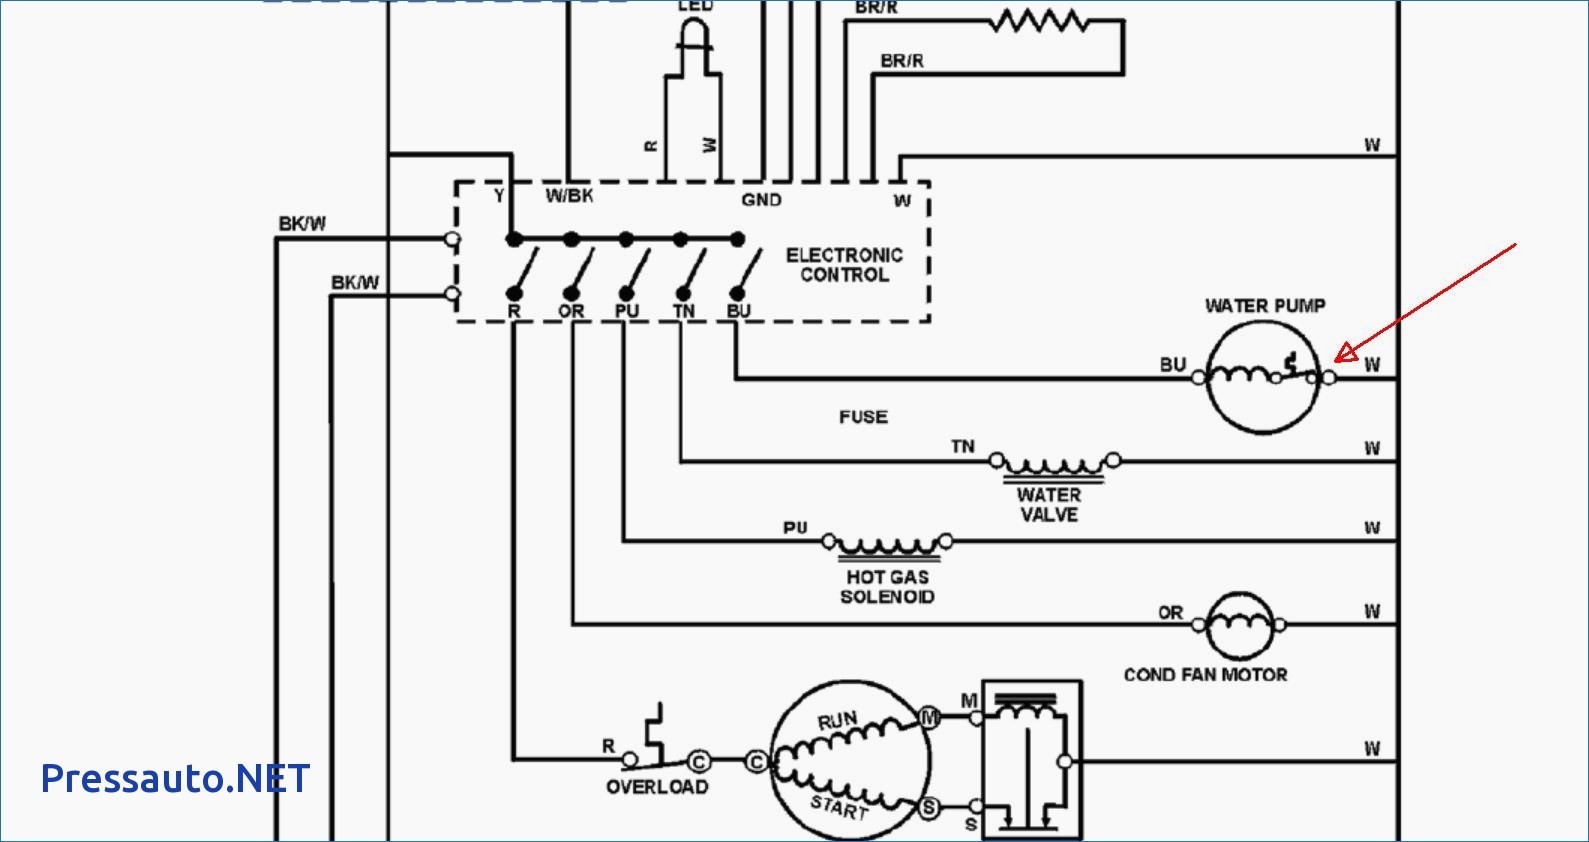 Wiring Diagram For Ge Ice Maker Get Free Image Pressauto Net Best Kenmore